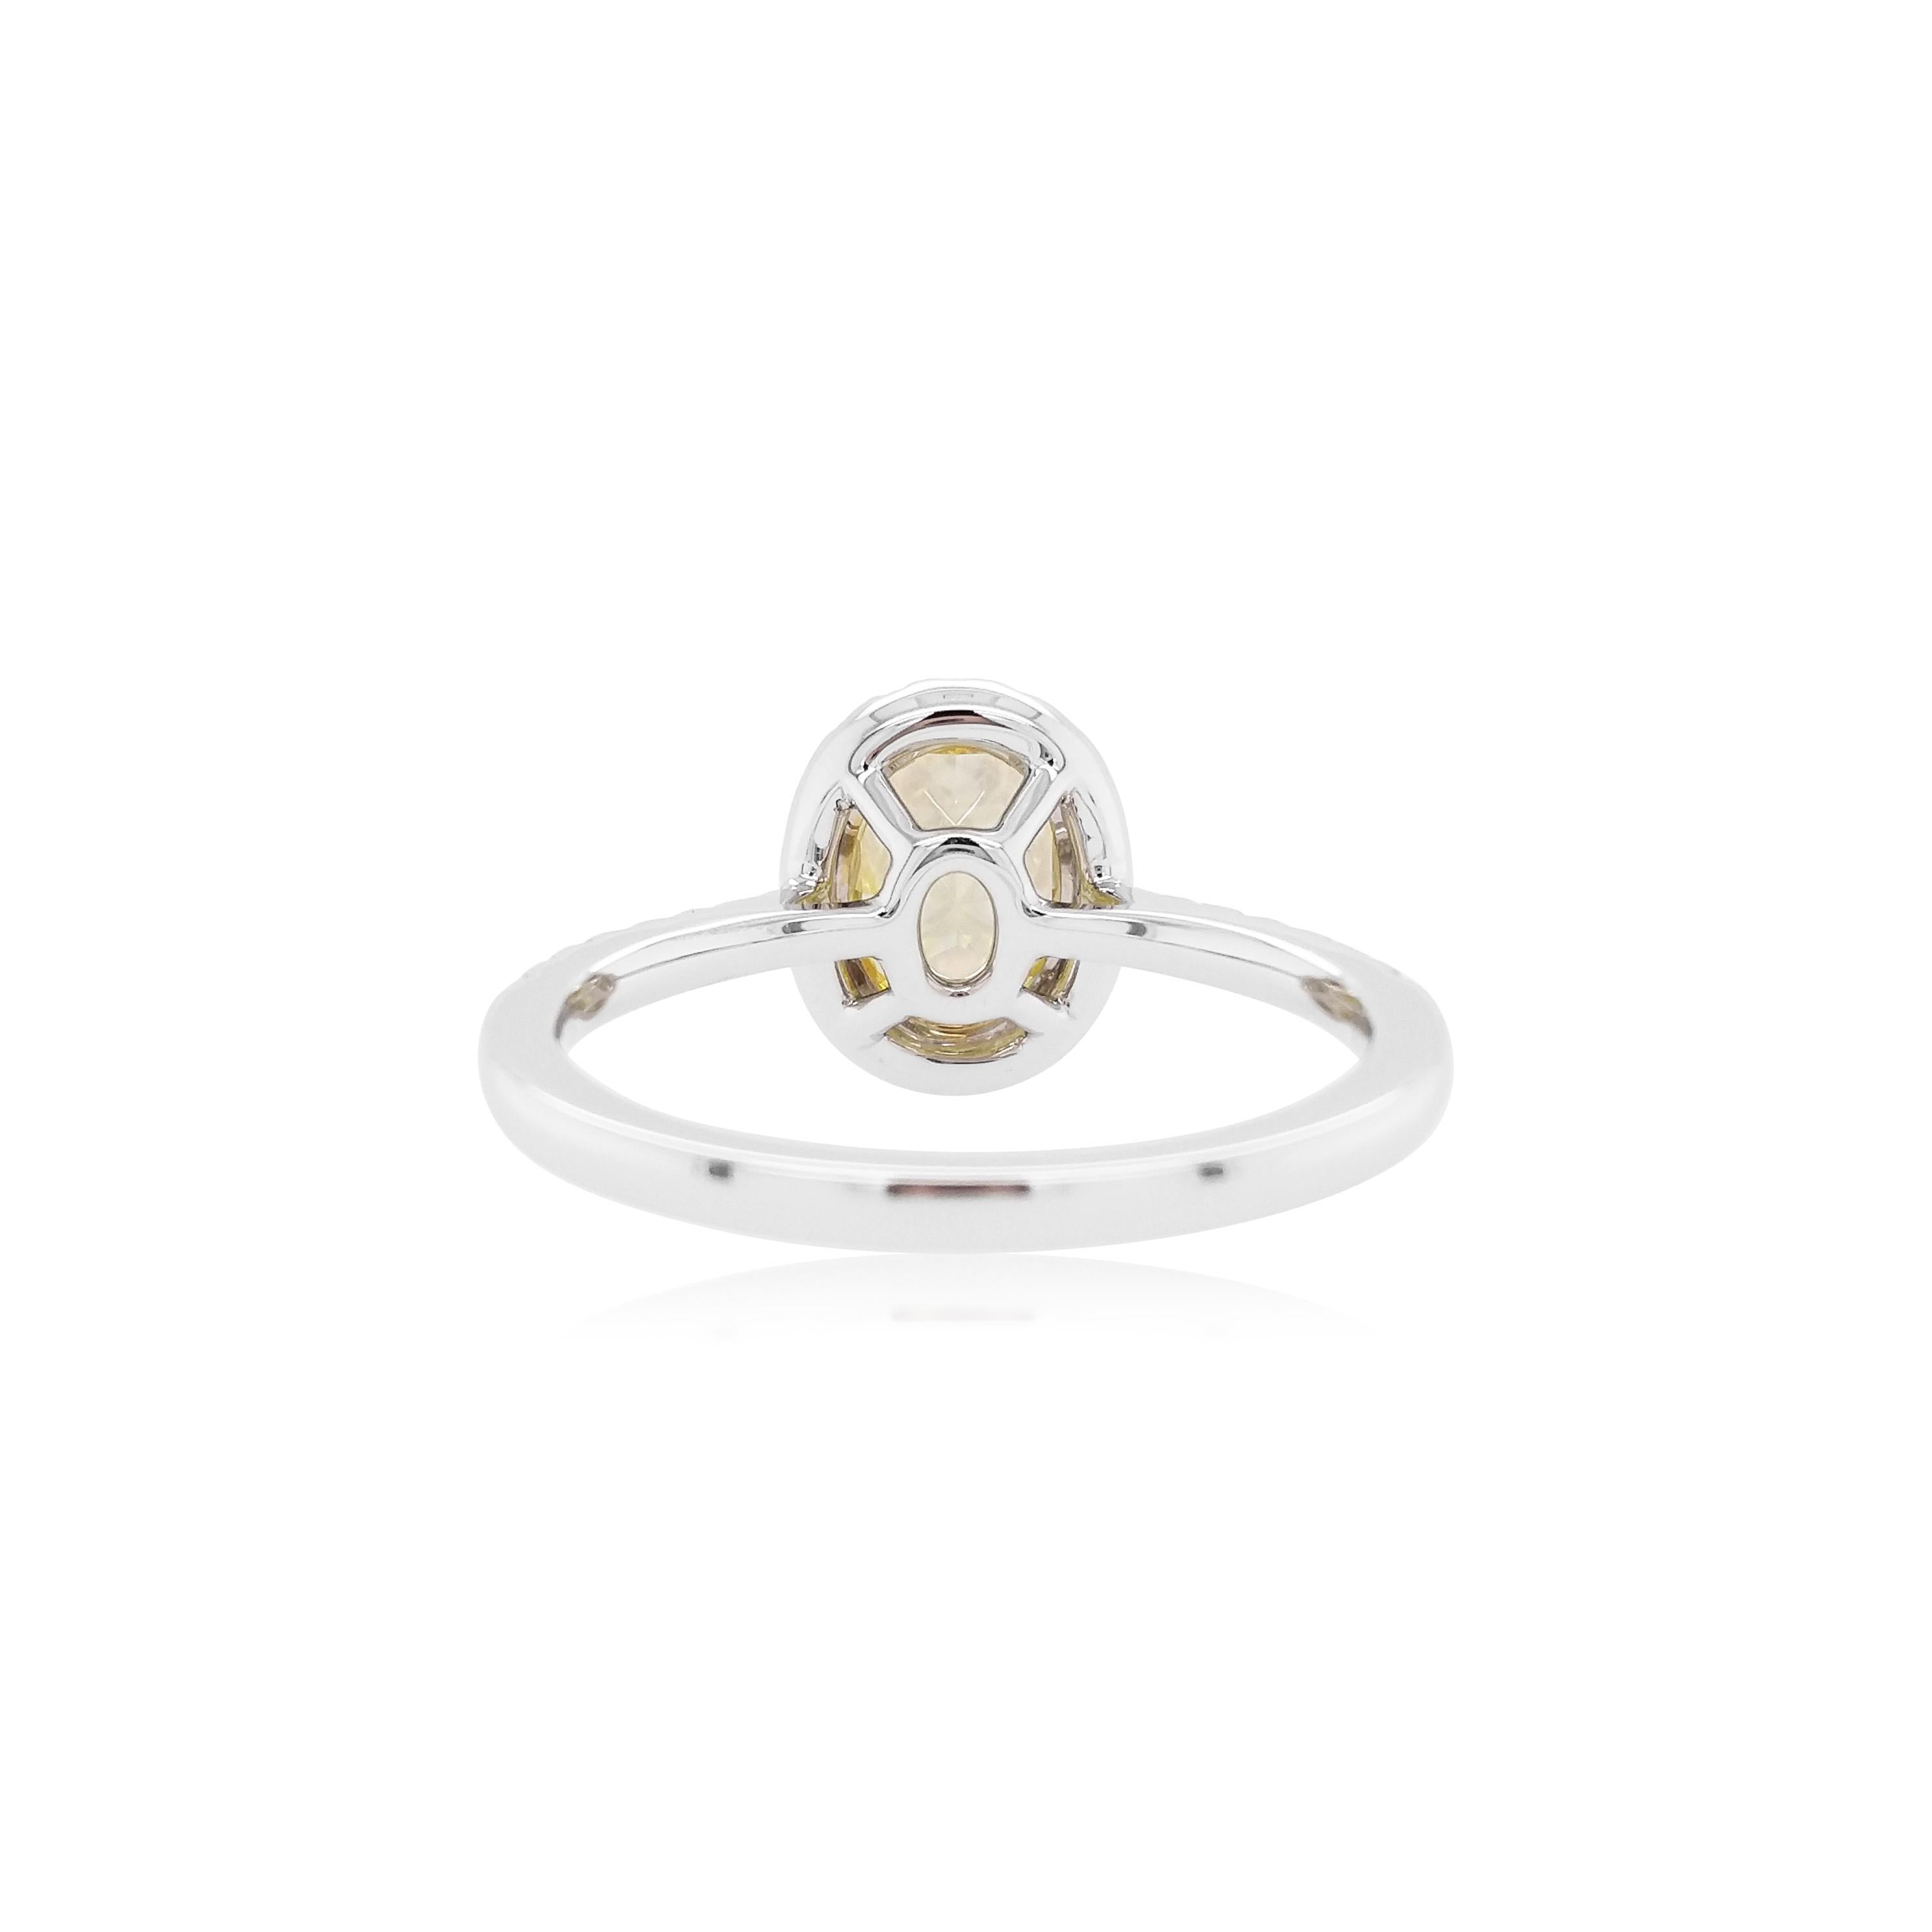 This exclusive bridal ring features a luscious Yellow diamond at the heart of the design, by framing a delicate halo of glittering white diamonds. Set in 18K gold, bold and striking, this unique ring is the perfect statement piece. Each diamond is